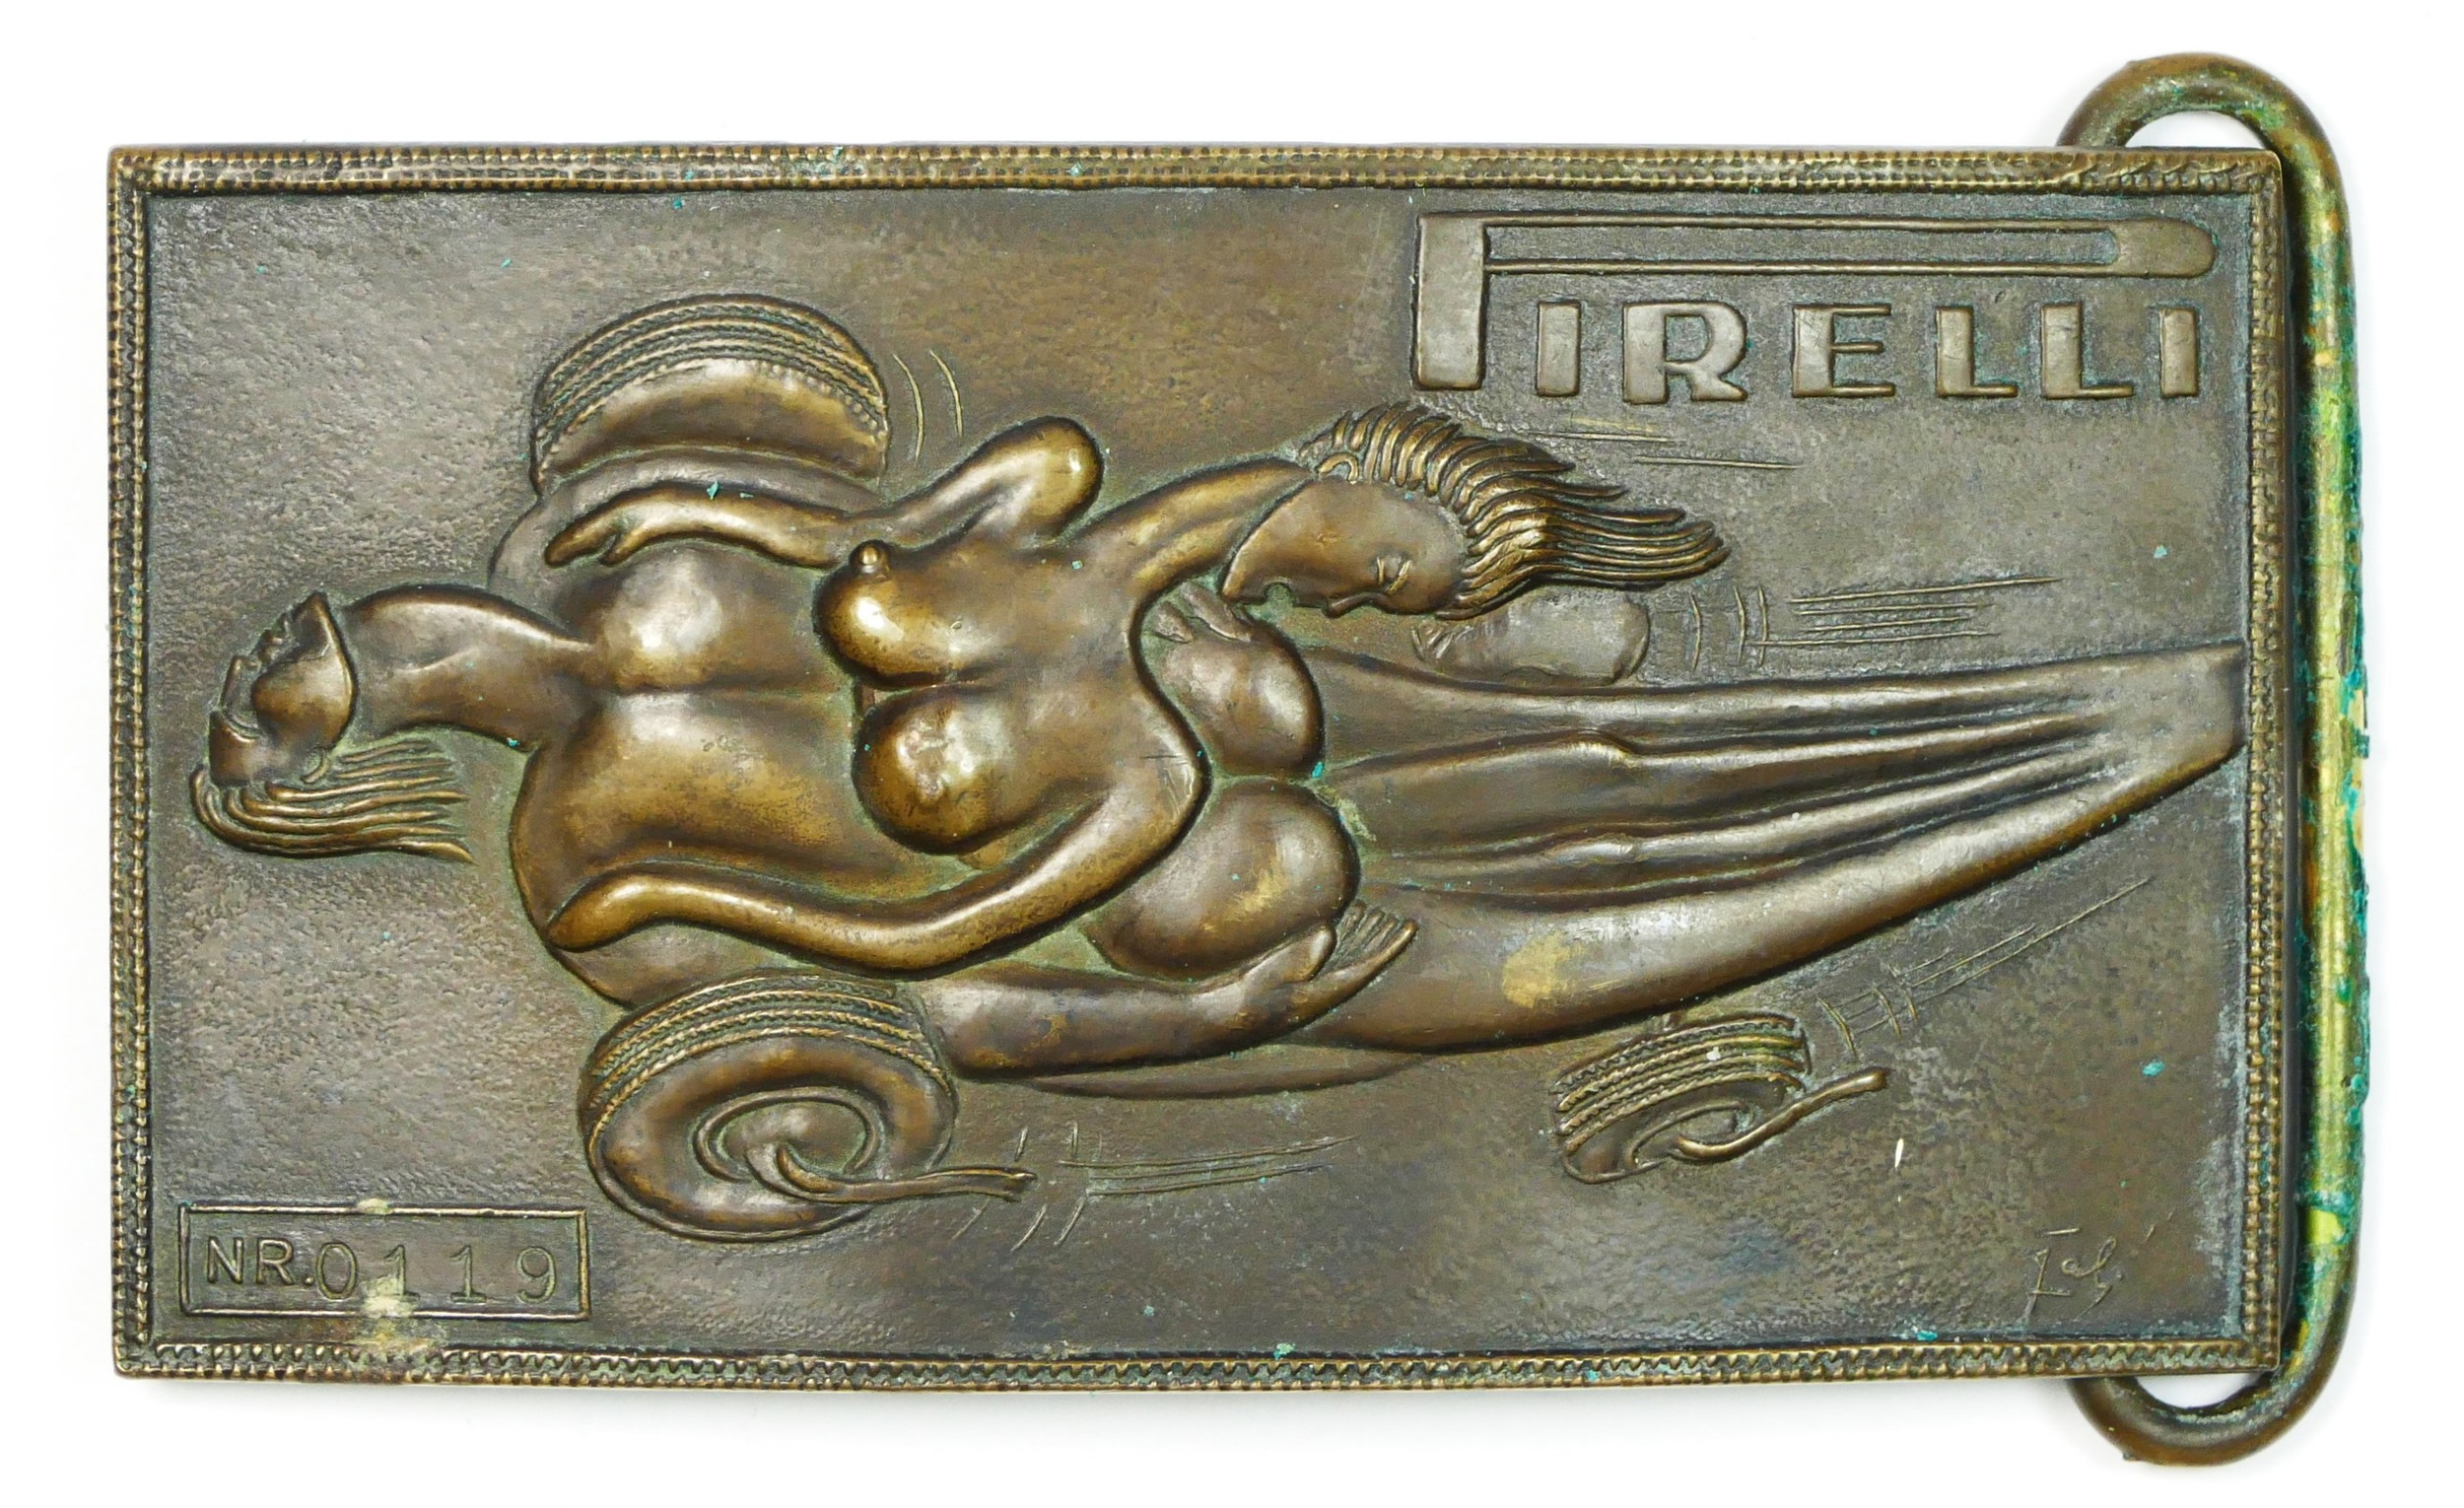 A Pirelli brass belt buckle designed by Salvador Dali (1904-1989), numbered NR0119, the front with